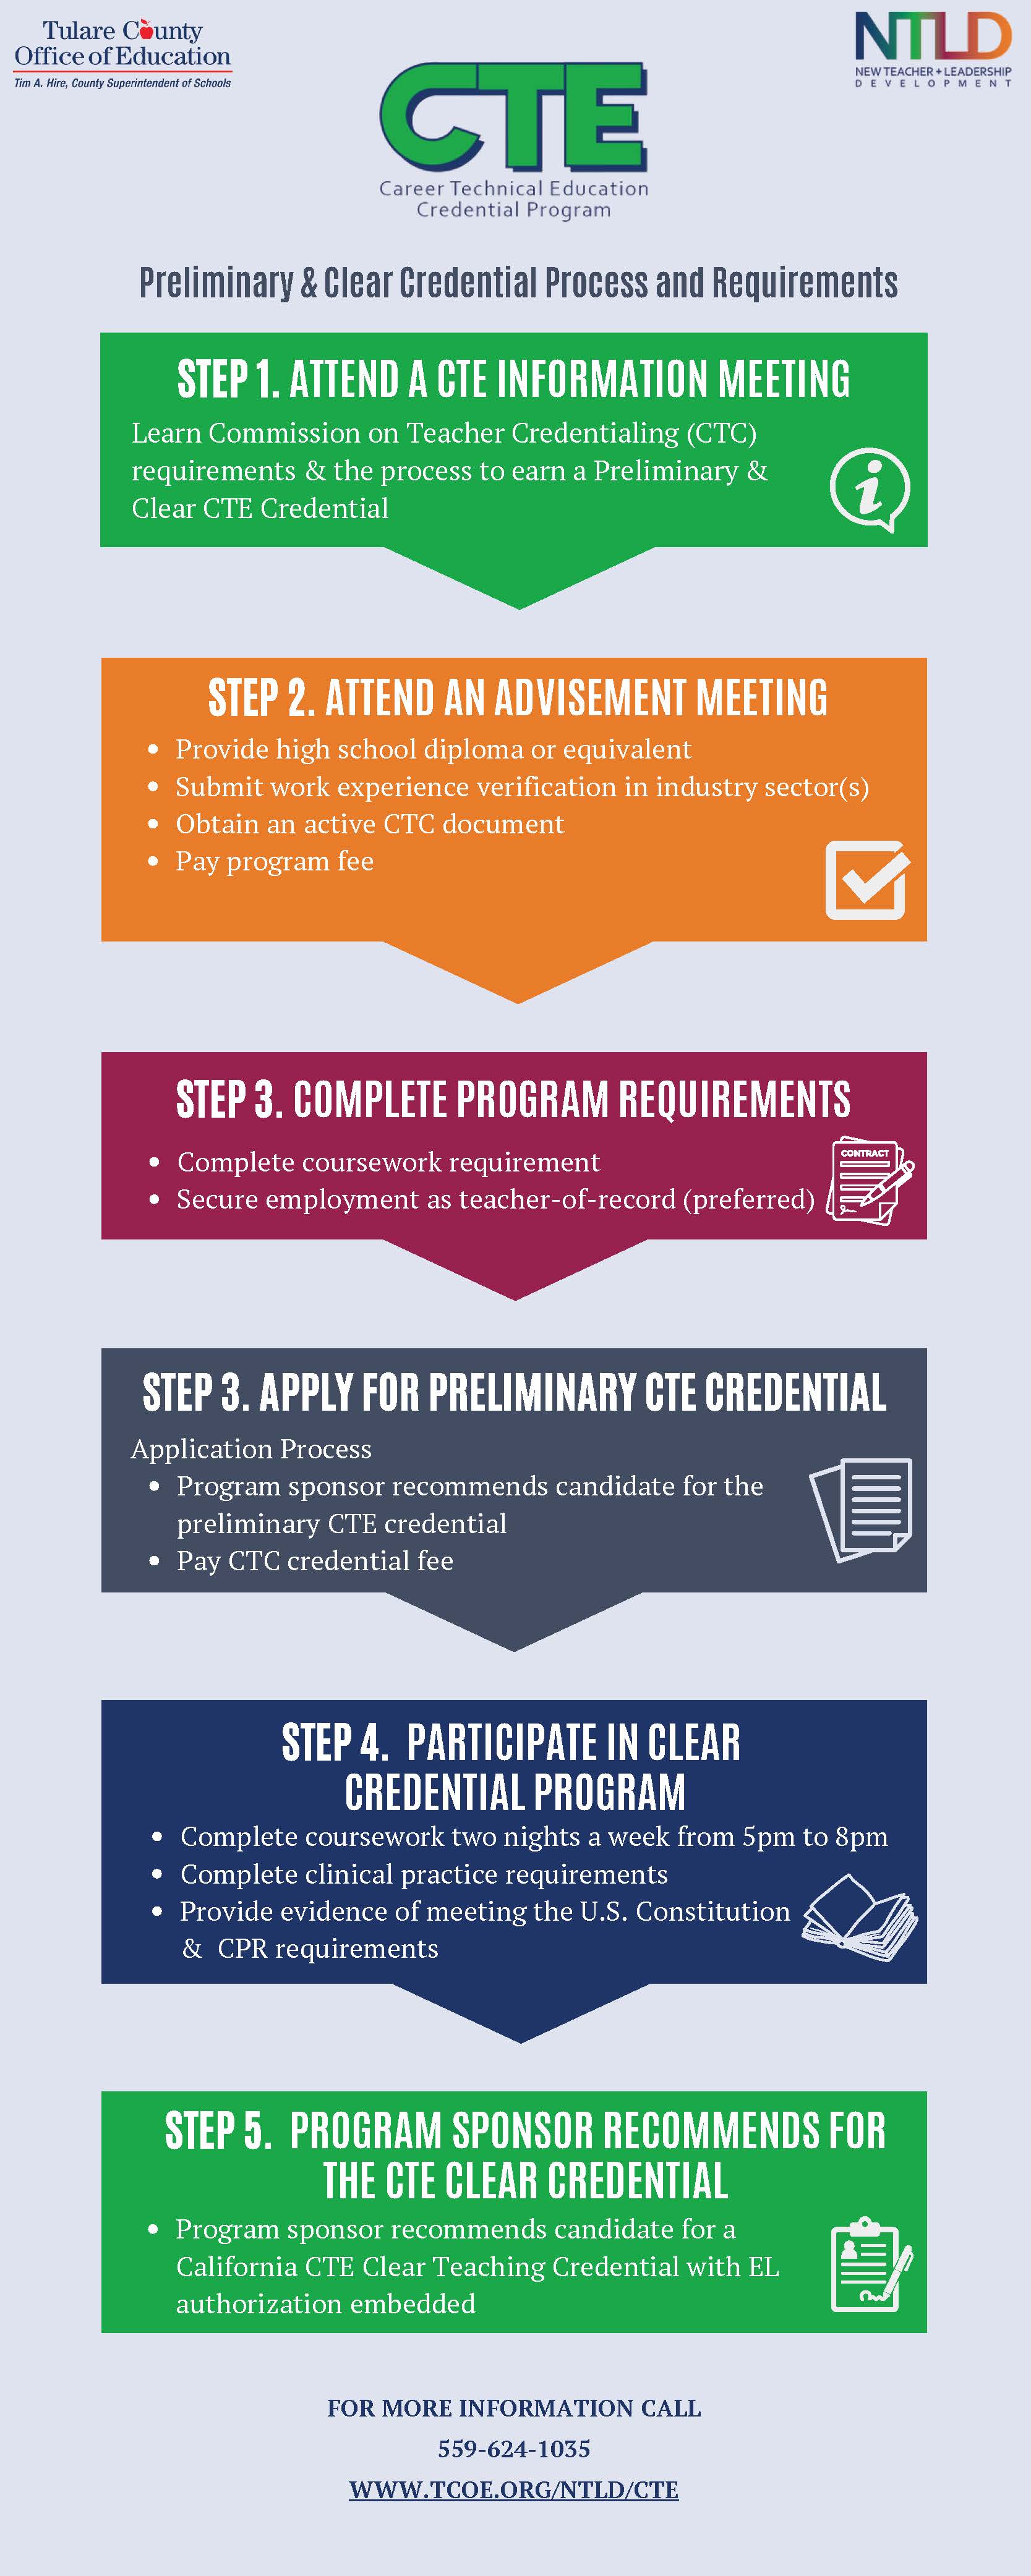 CTE Program Prelim & Clear Process and Requirements